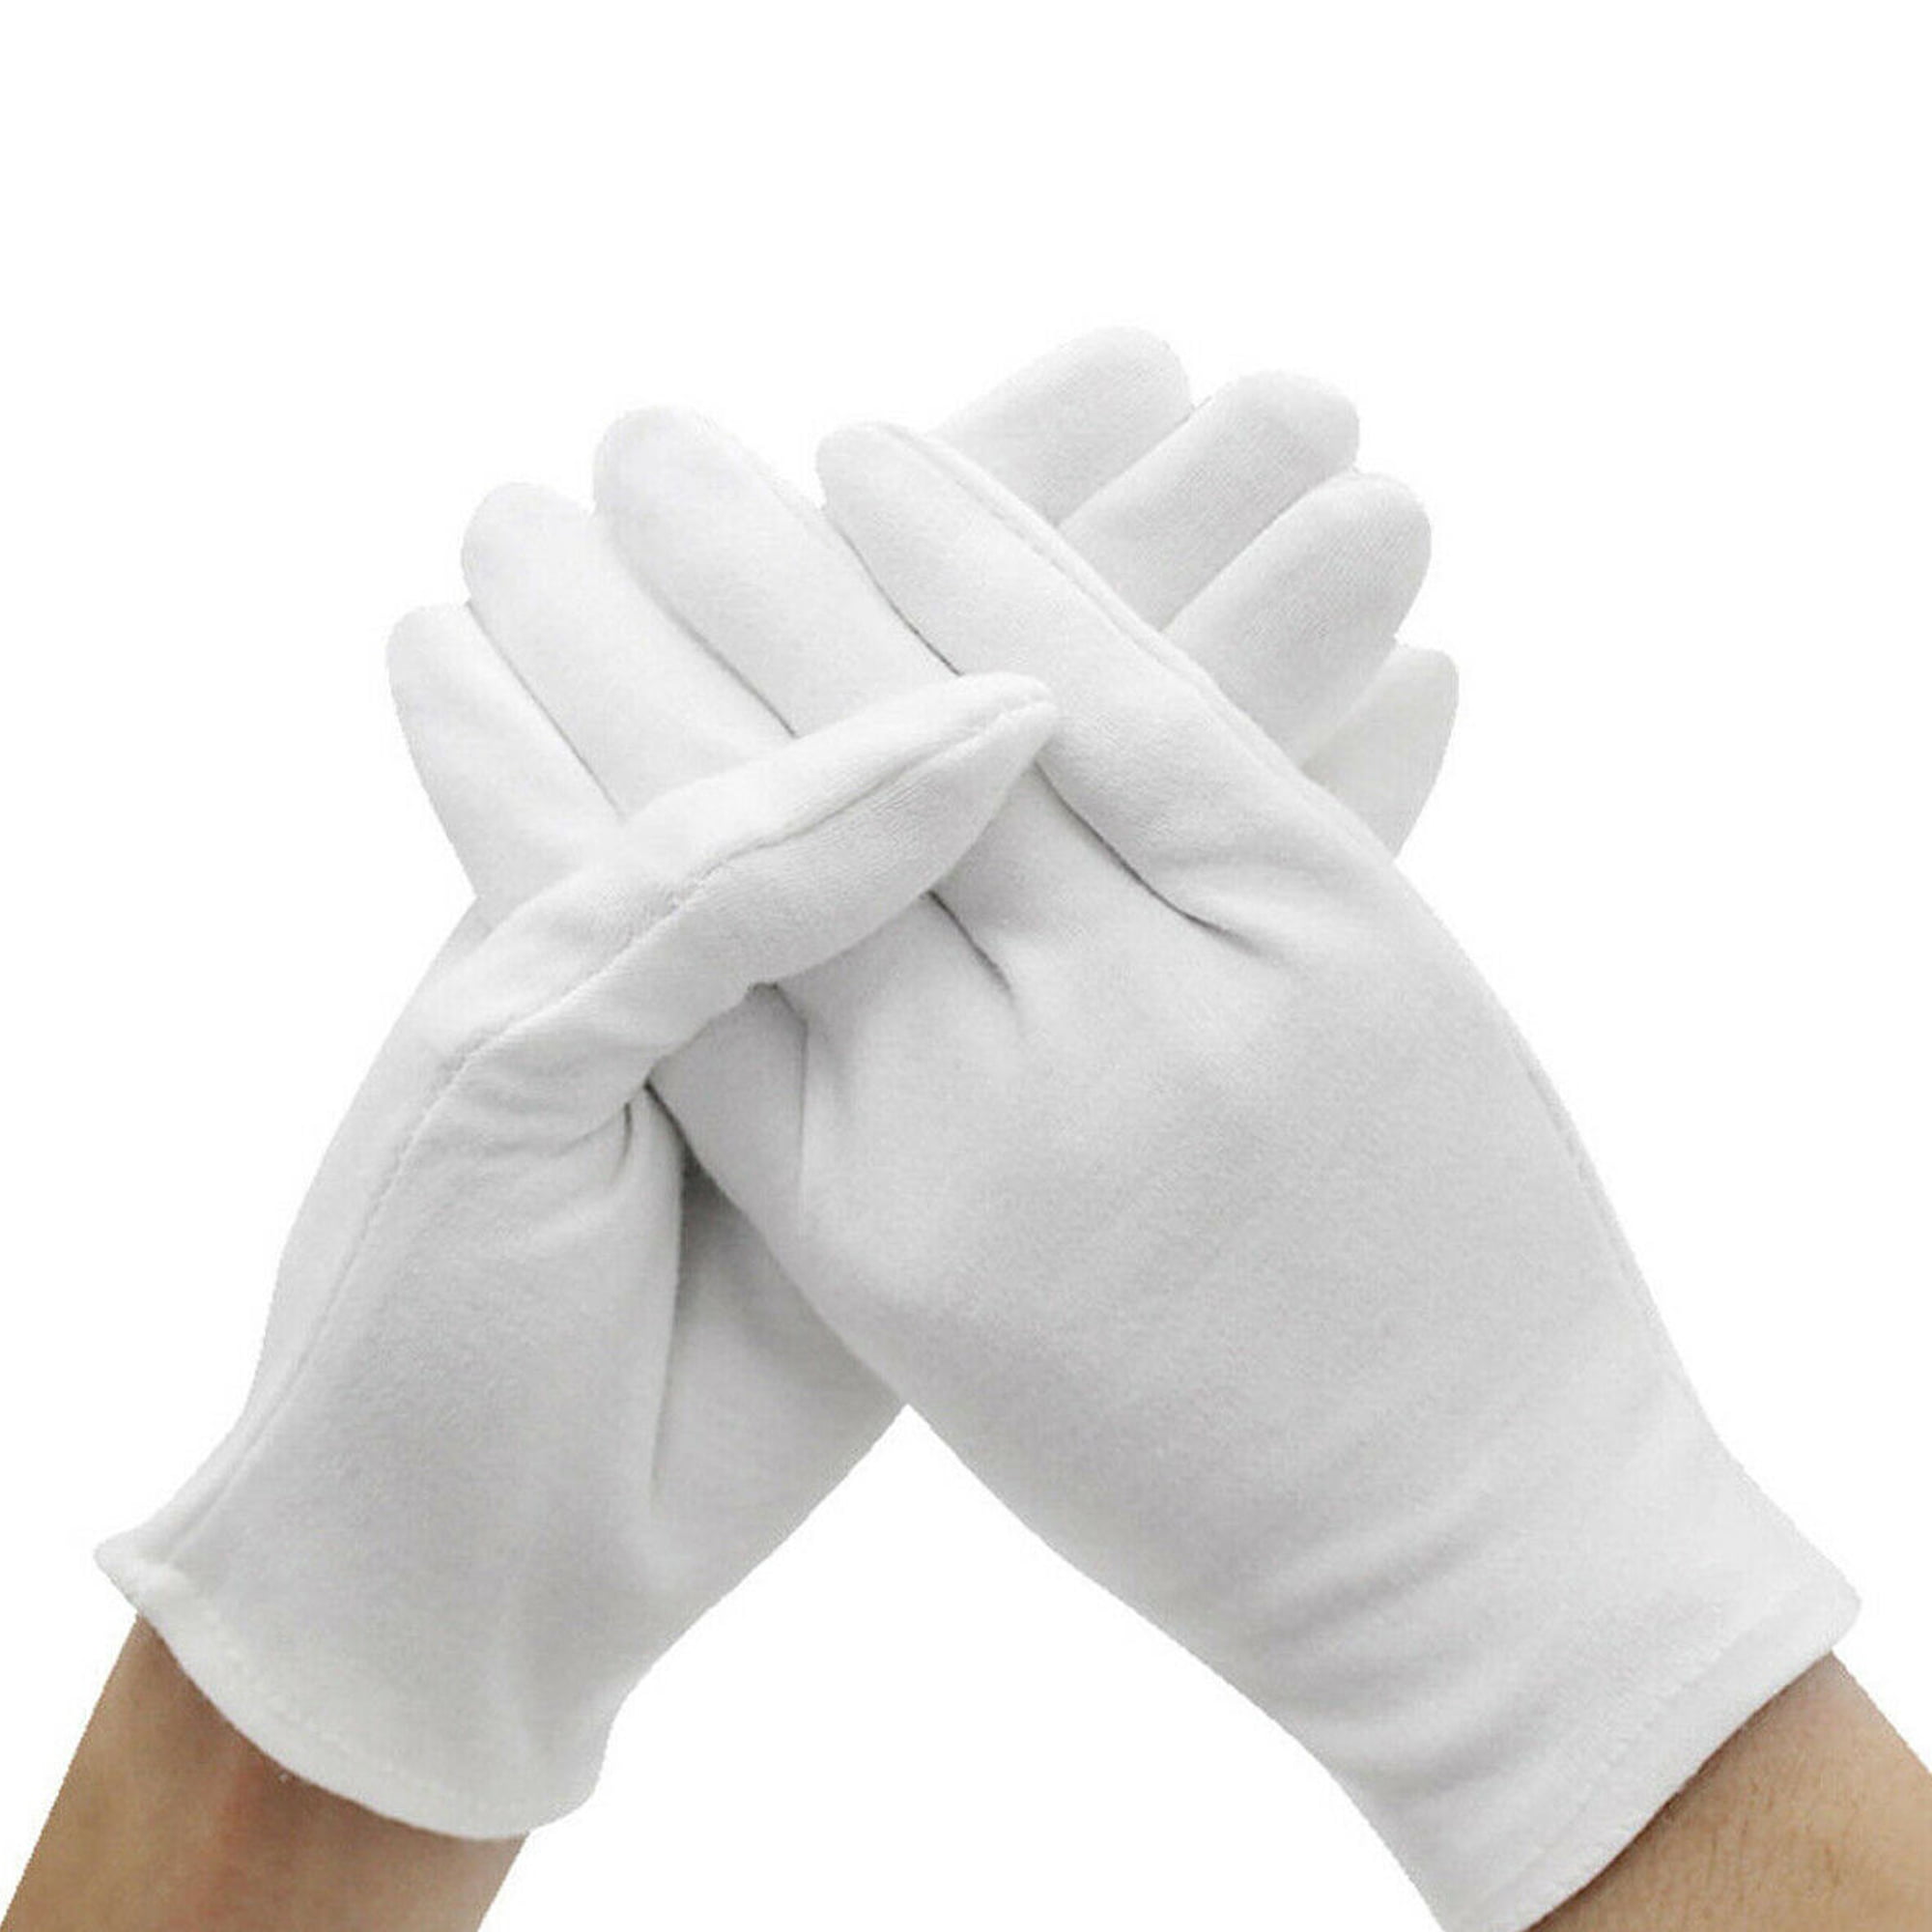 50 PAIR MENS OR WOMENS 100% COTTON WHITE COIN INSPECTION GLOVES JEWELRY LINER 